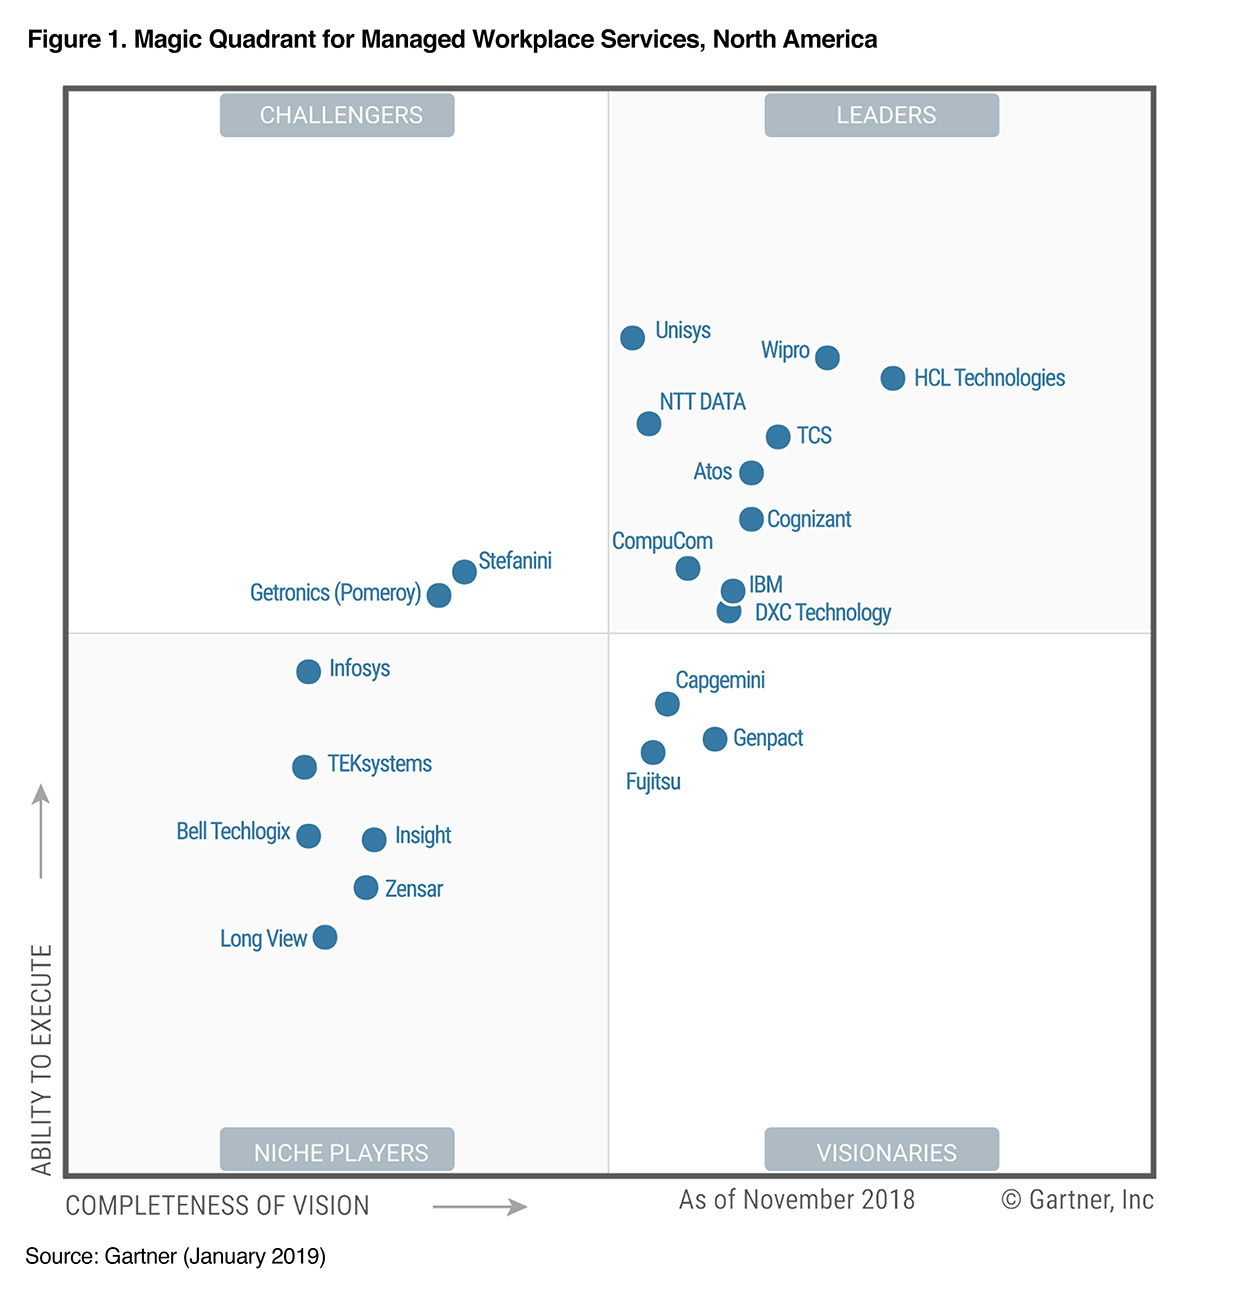 Wipro is cited as one of the leaders in Gartner’s Magic Quadrant